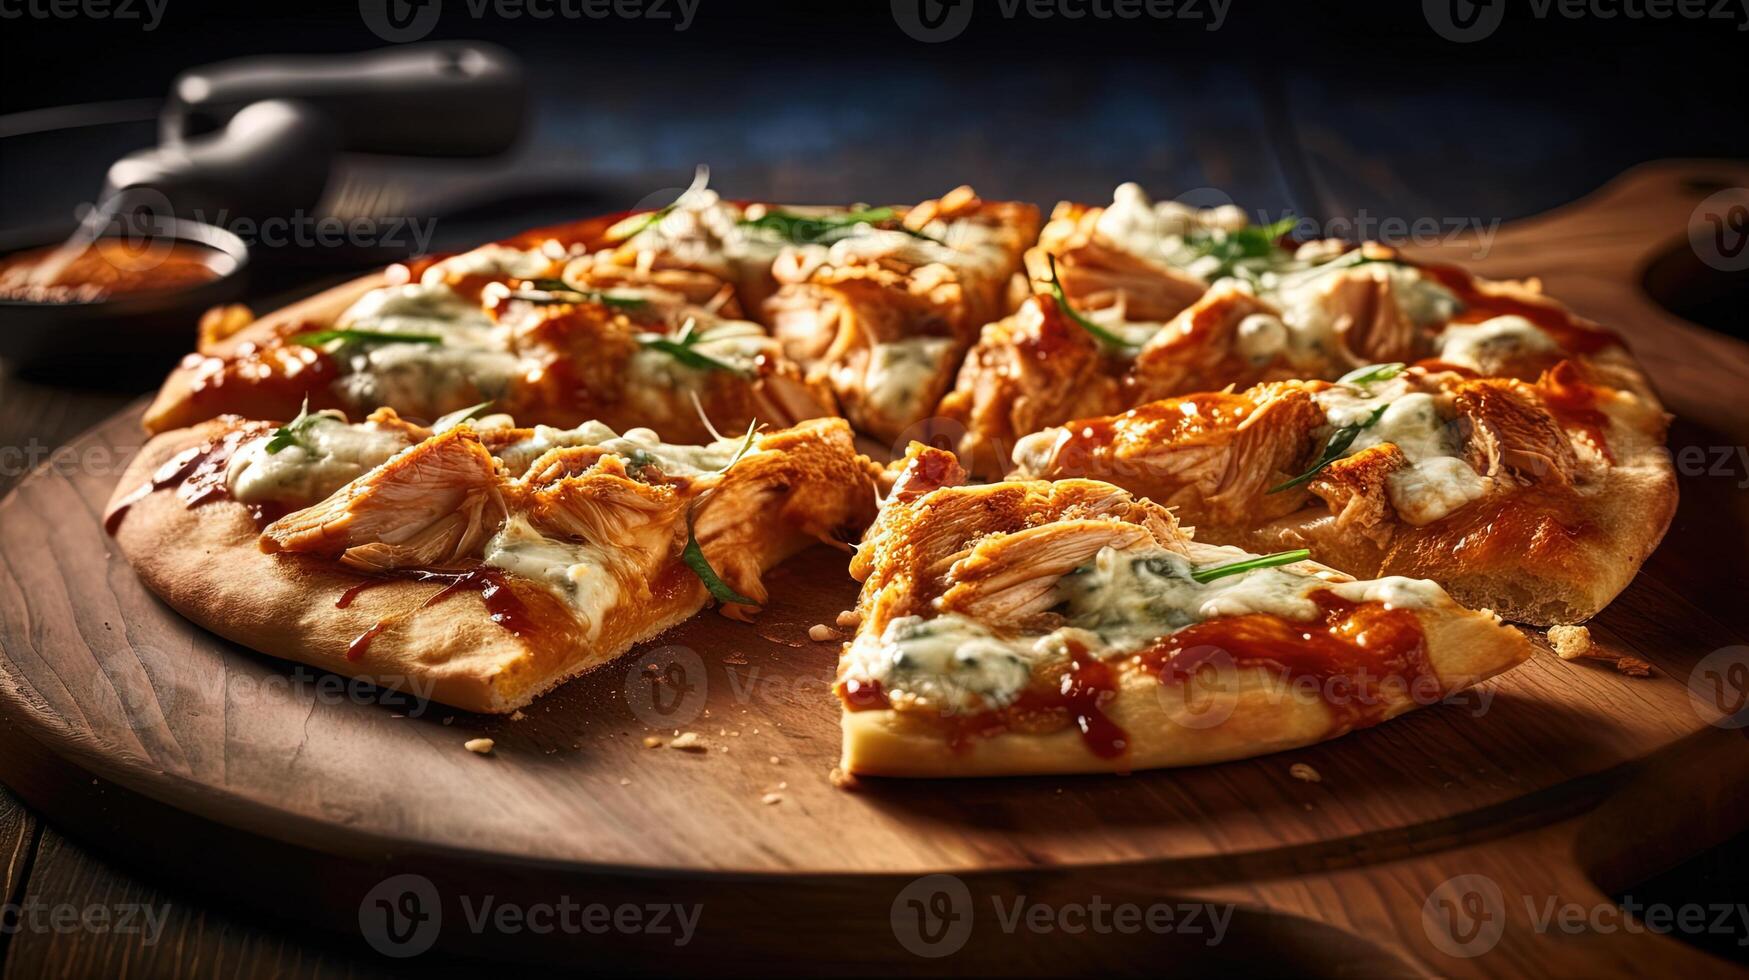 Delicous Homemade Buffalo Chicken Pizza on Wooden Cutting Board for Fast Food Concept, Food Photography. Template or Banner for Restaurant. . photo